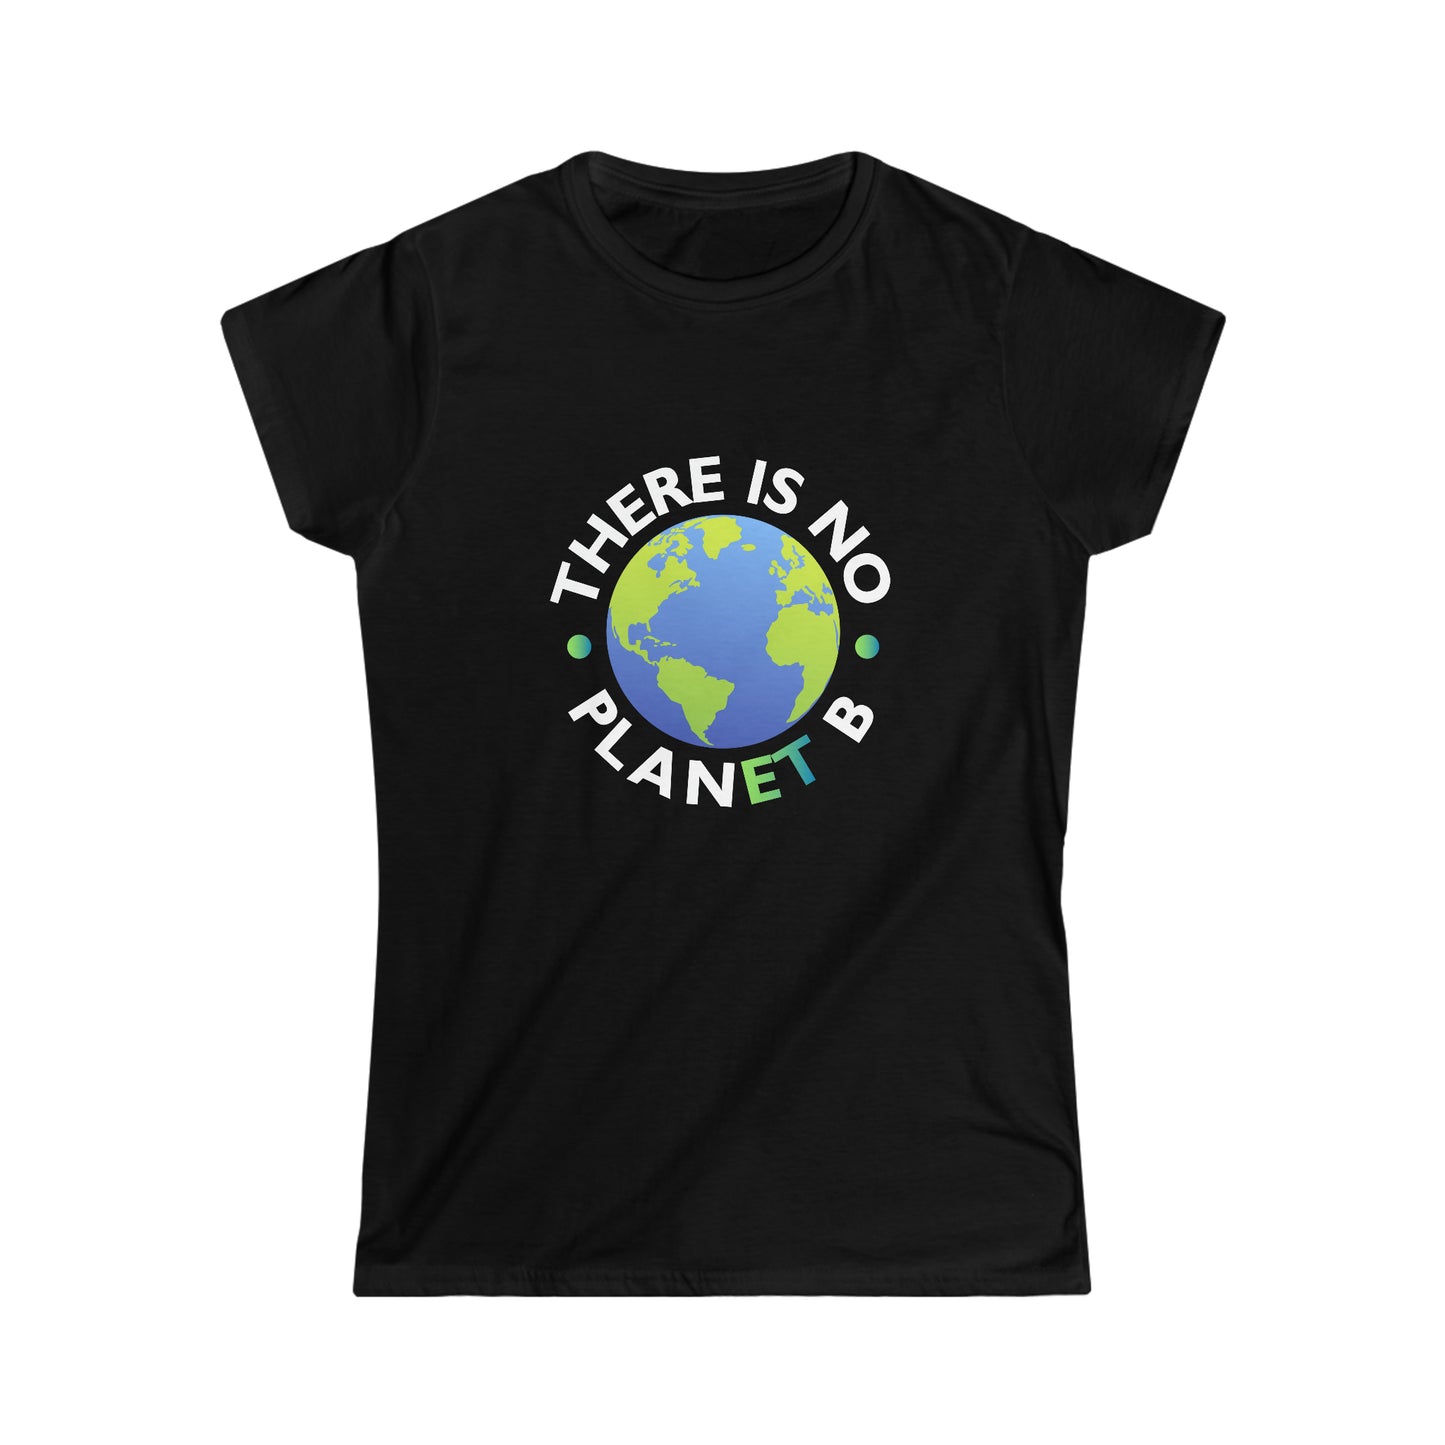 “There Is No Planet B” Women’s T-Shirts